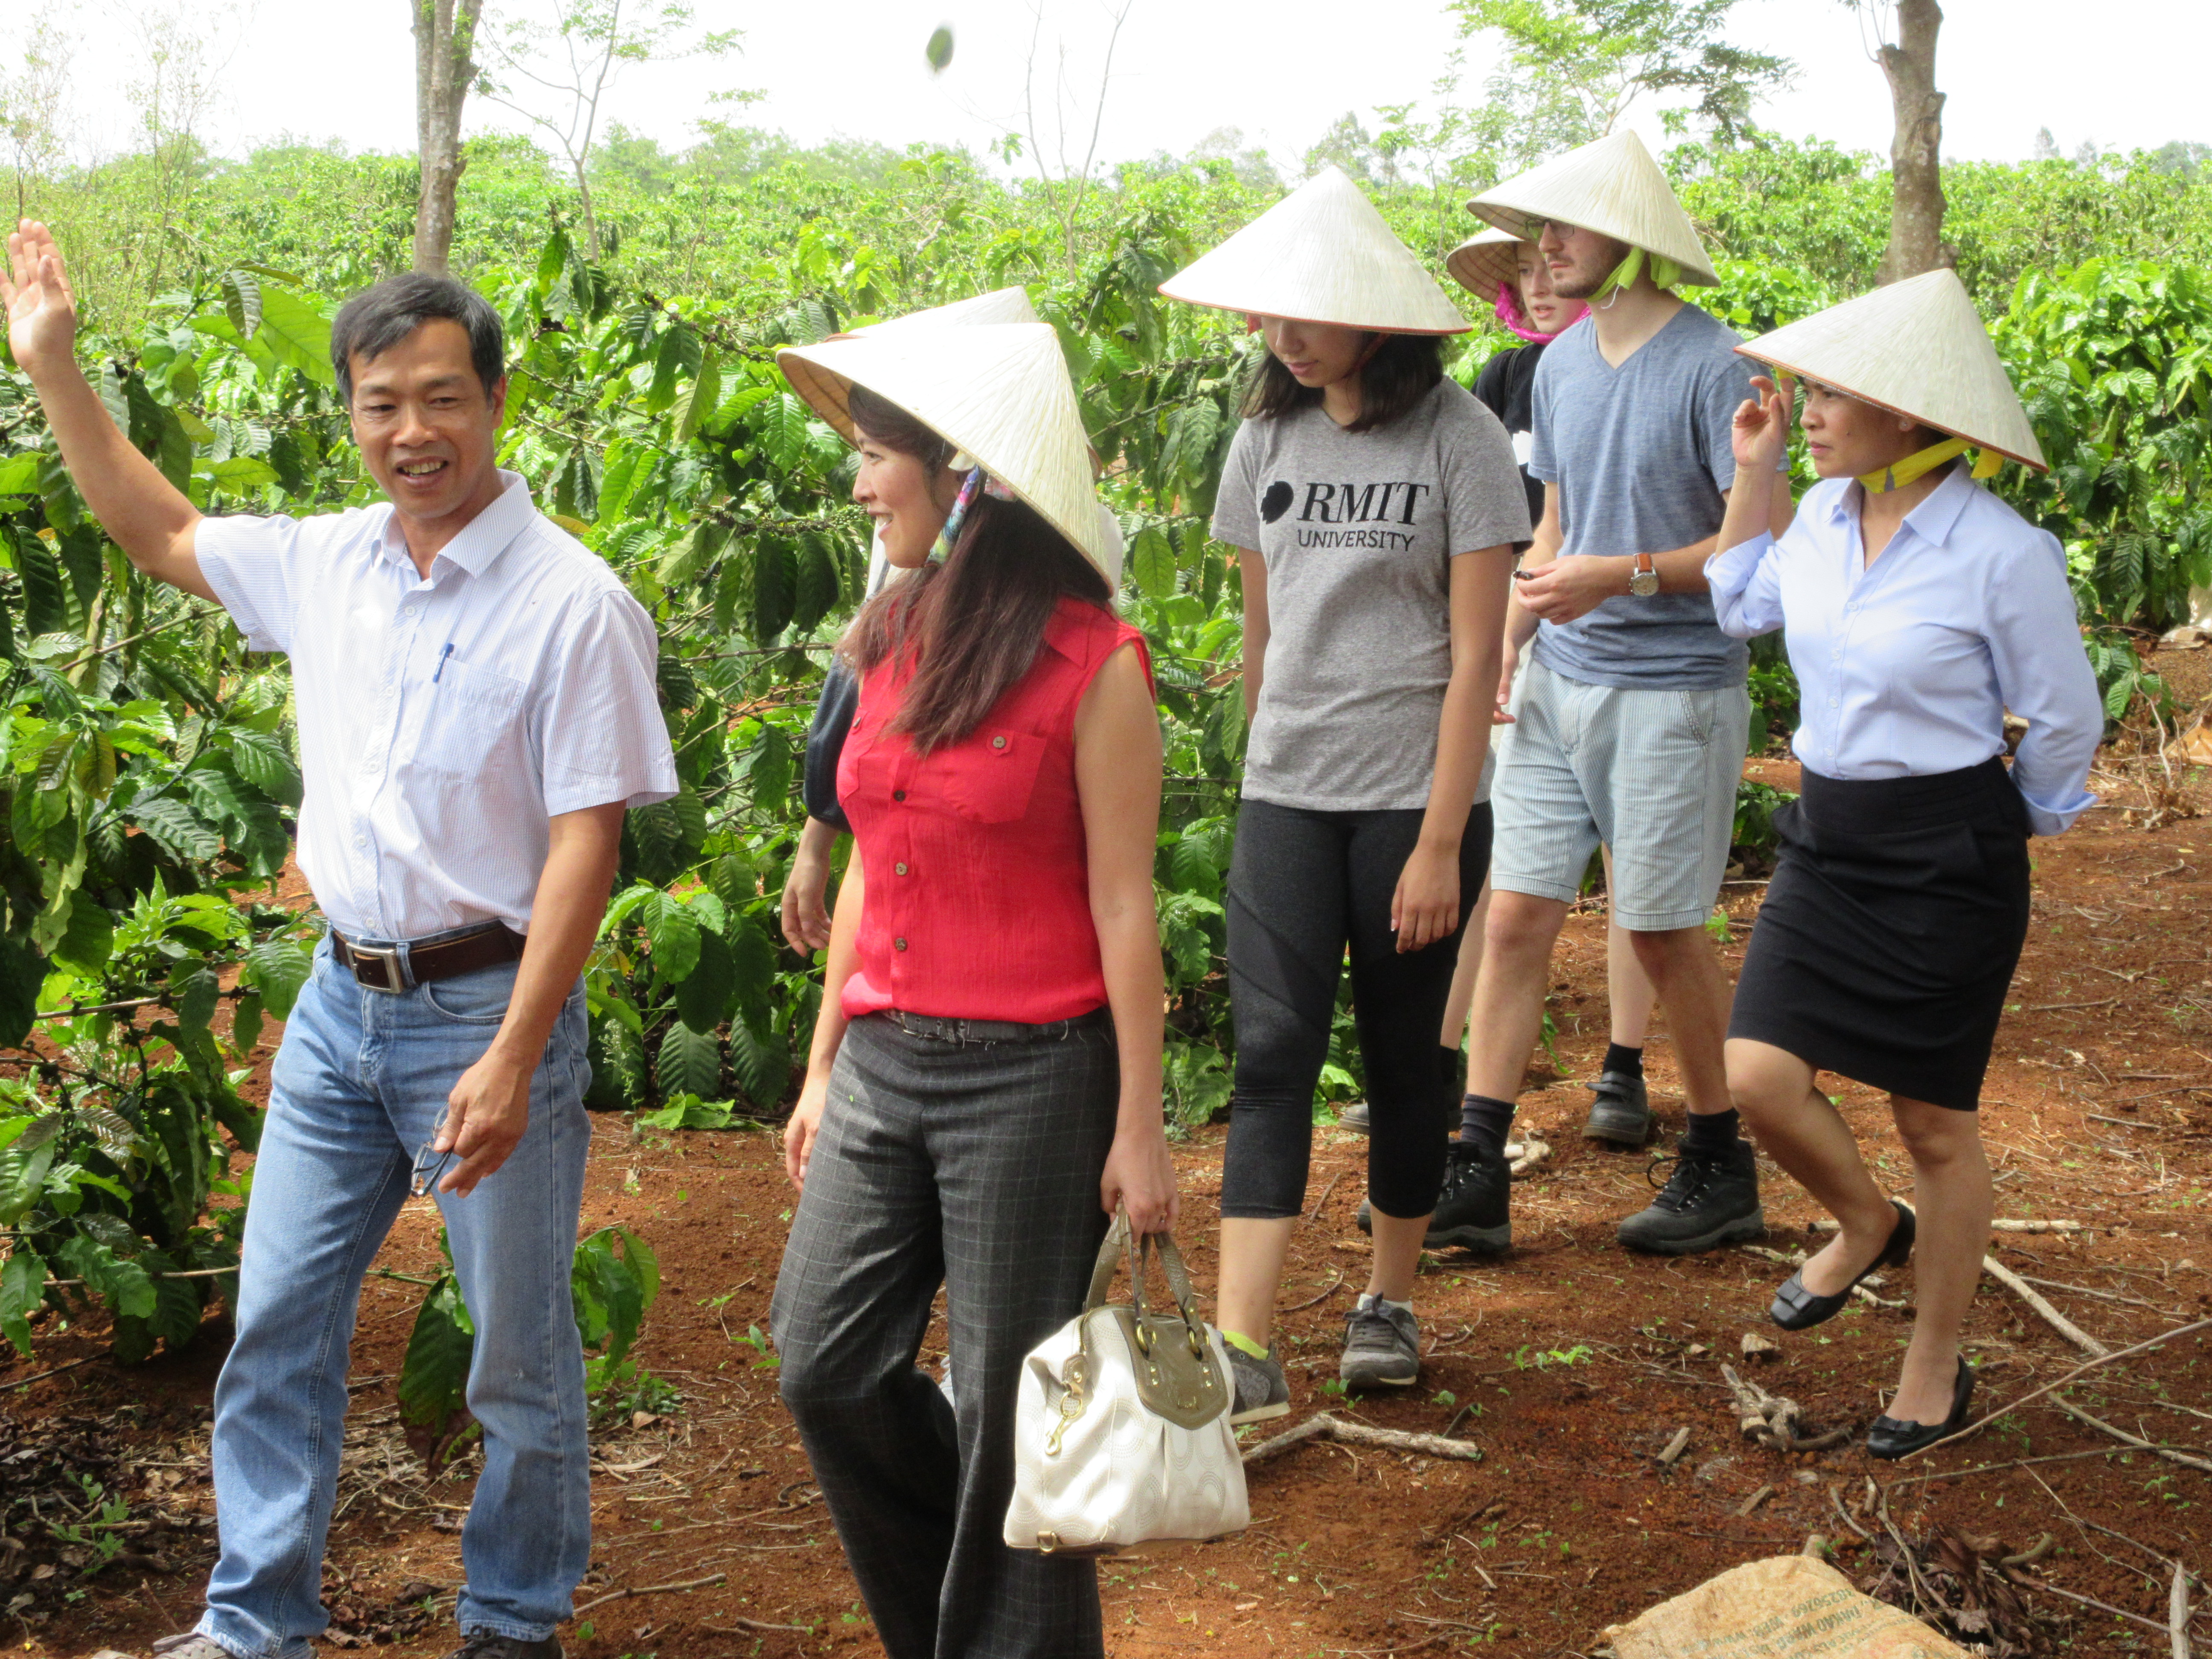 Huynh travelled with RMIT students to Vietnam and met with farmers as part of a study tour and research project in rural areas.